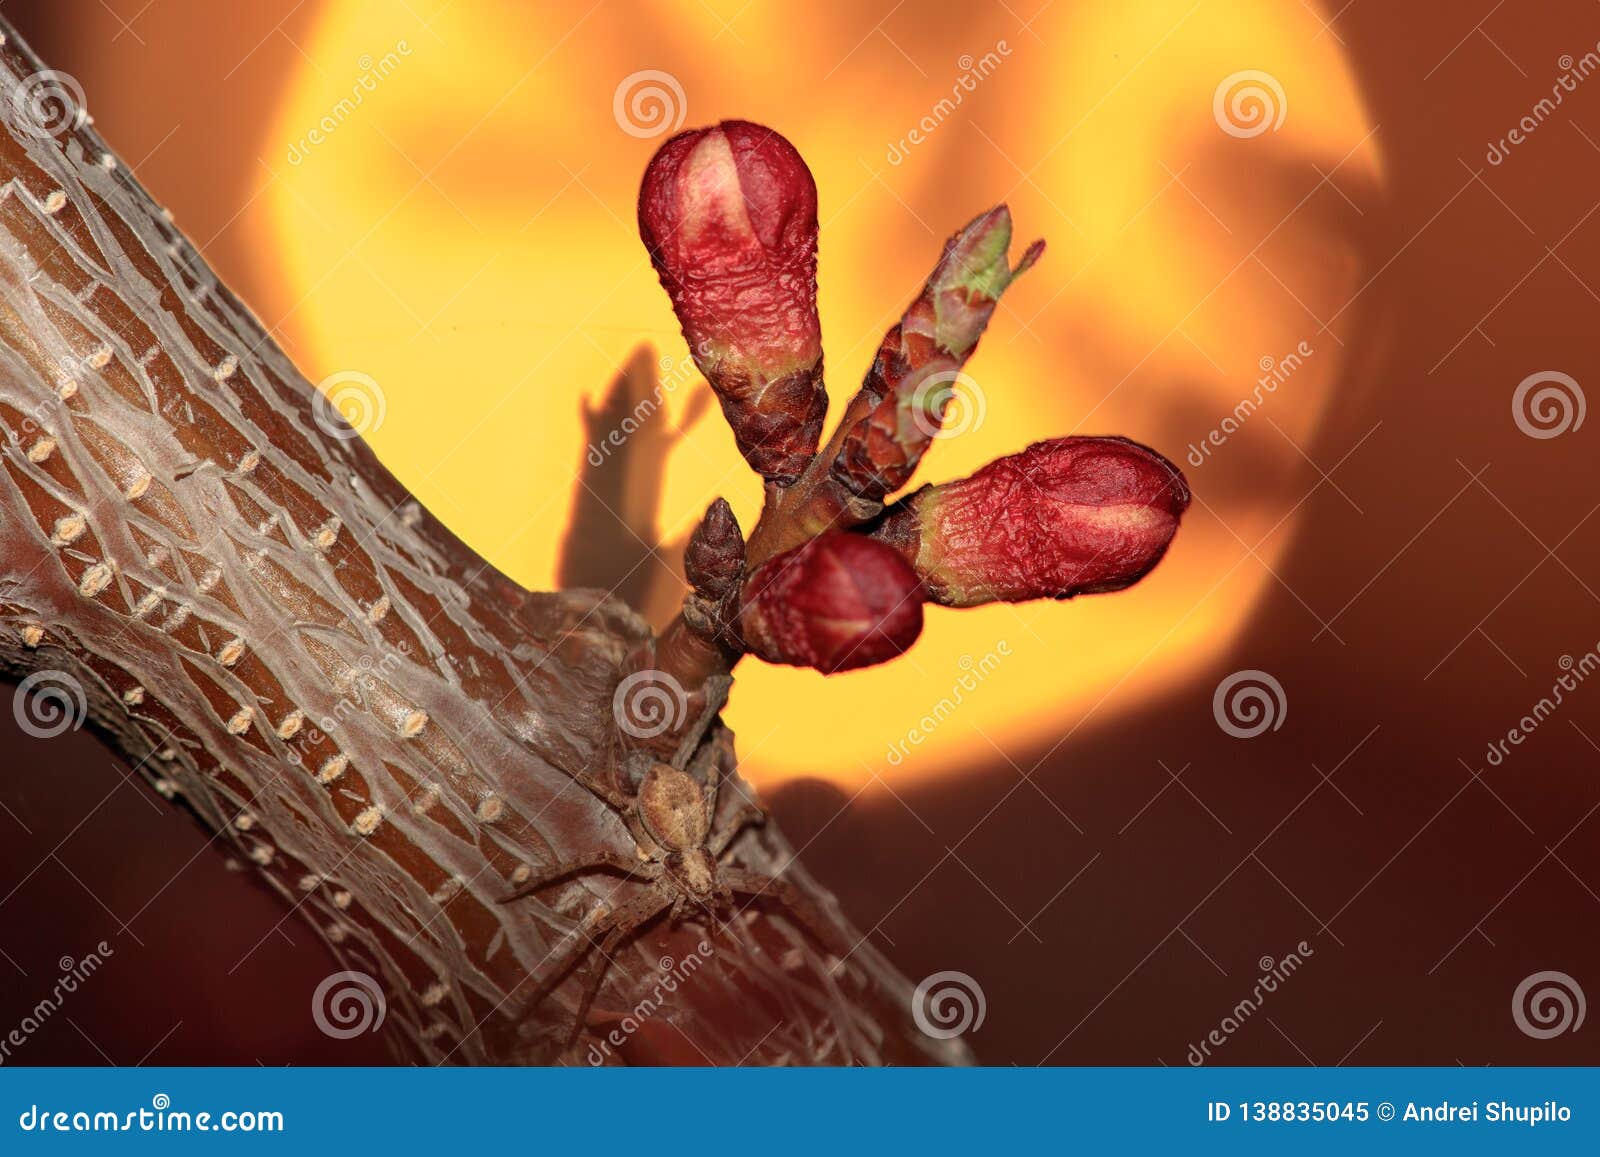 Flowers Blossom on Apricot Tree at Sunset Stock Image - Image of spring ...